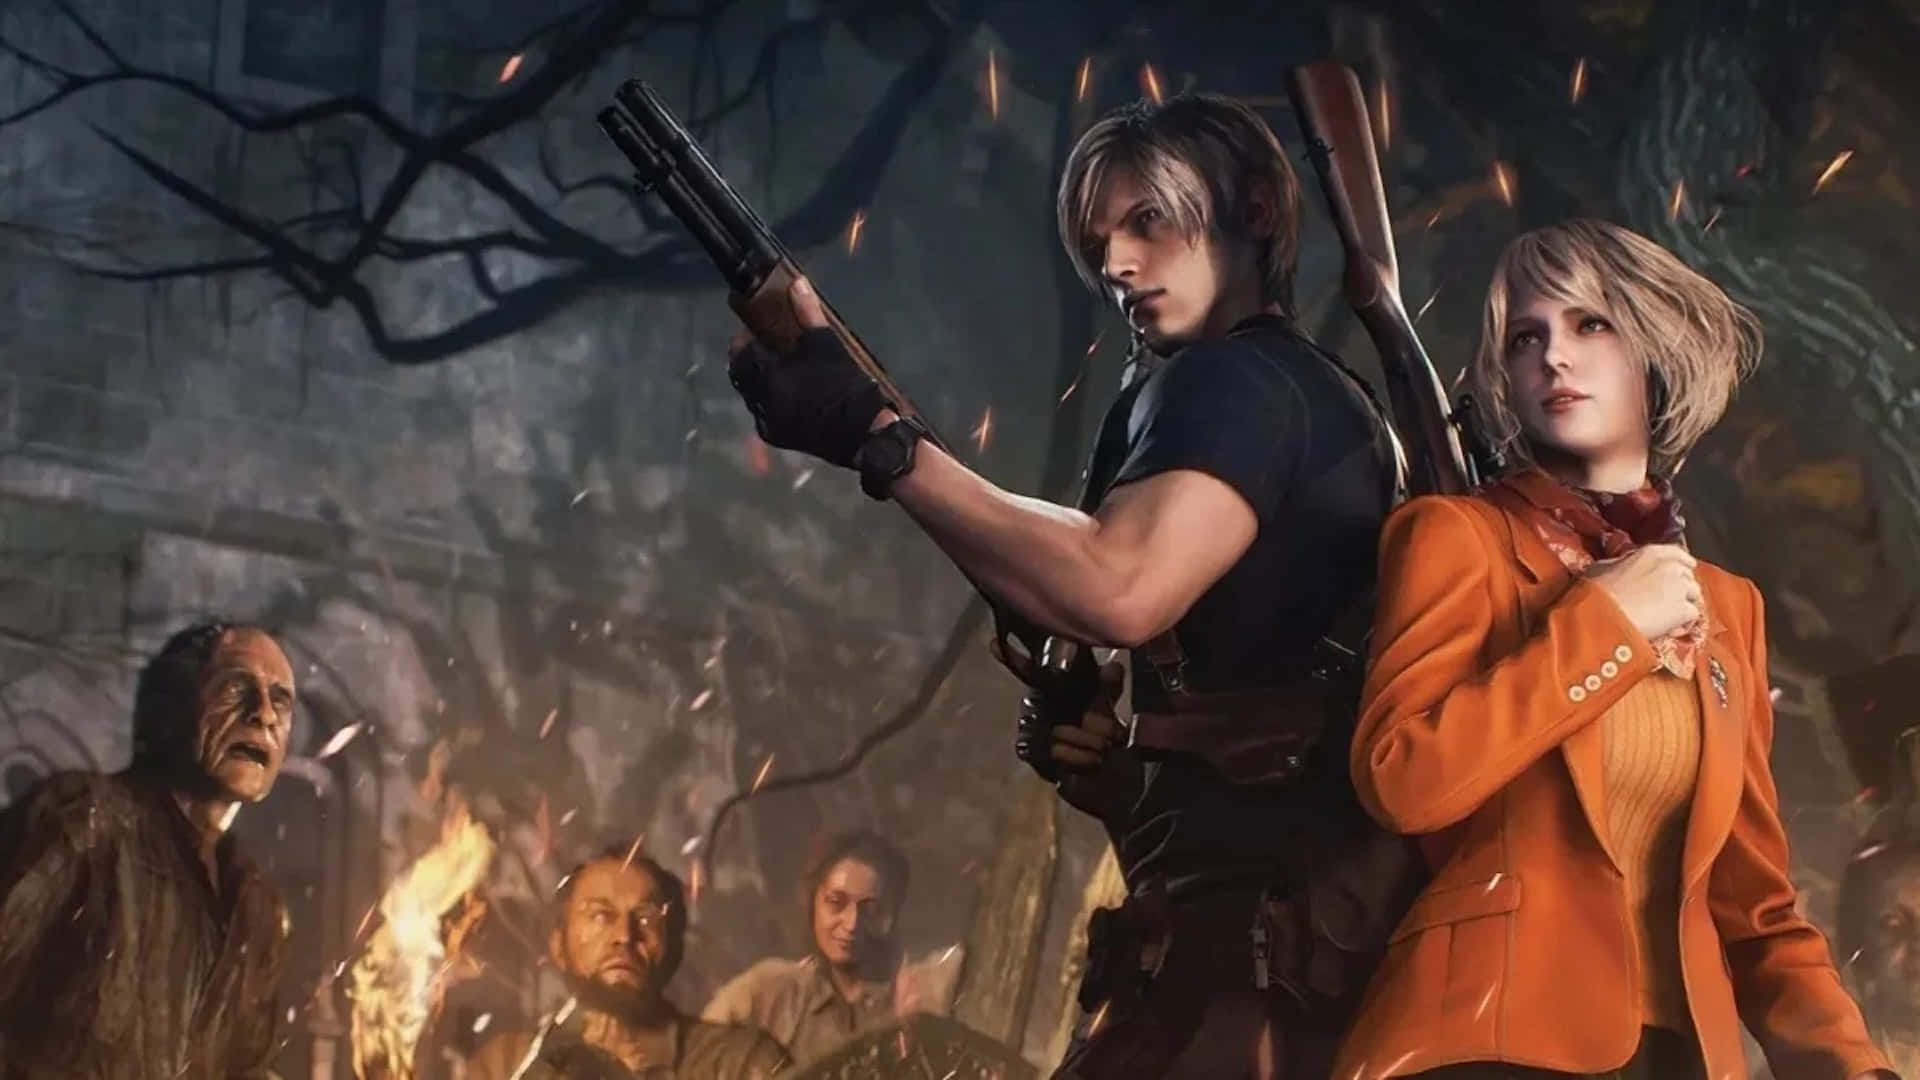 Resident Evil2 Remake Leonand Claire Action Pose Wallpaper